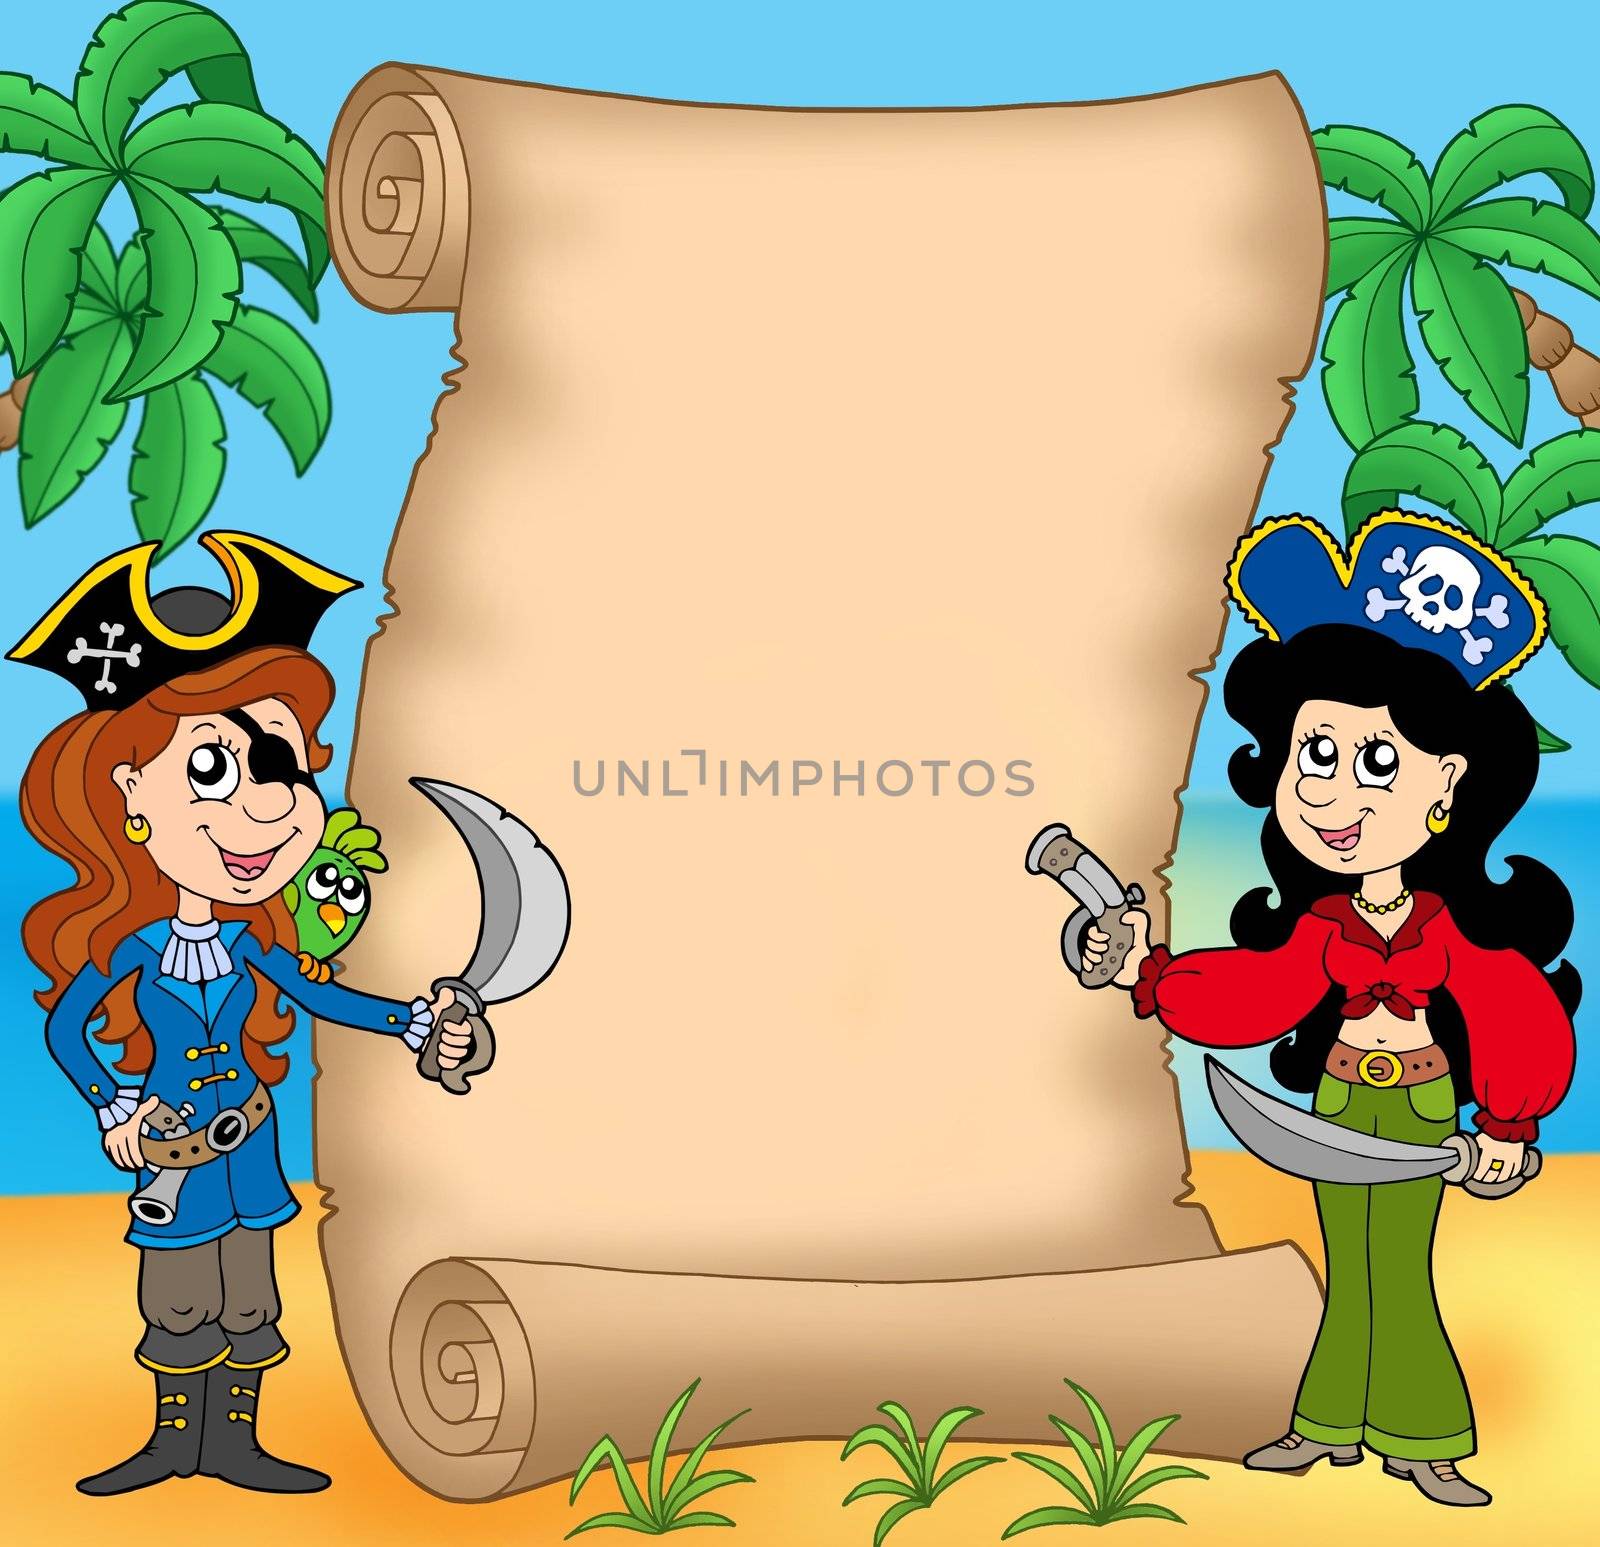 Pirate girls with scroll 1 - color illustration.